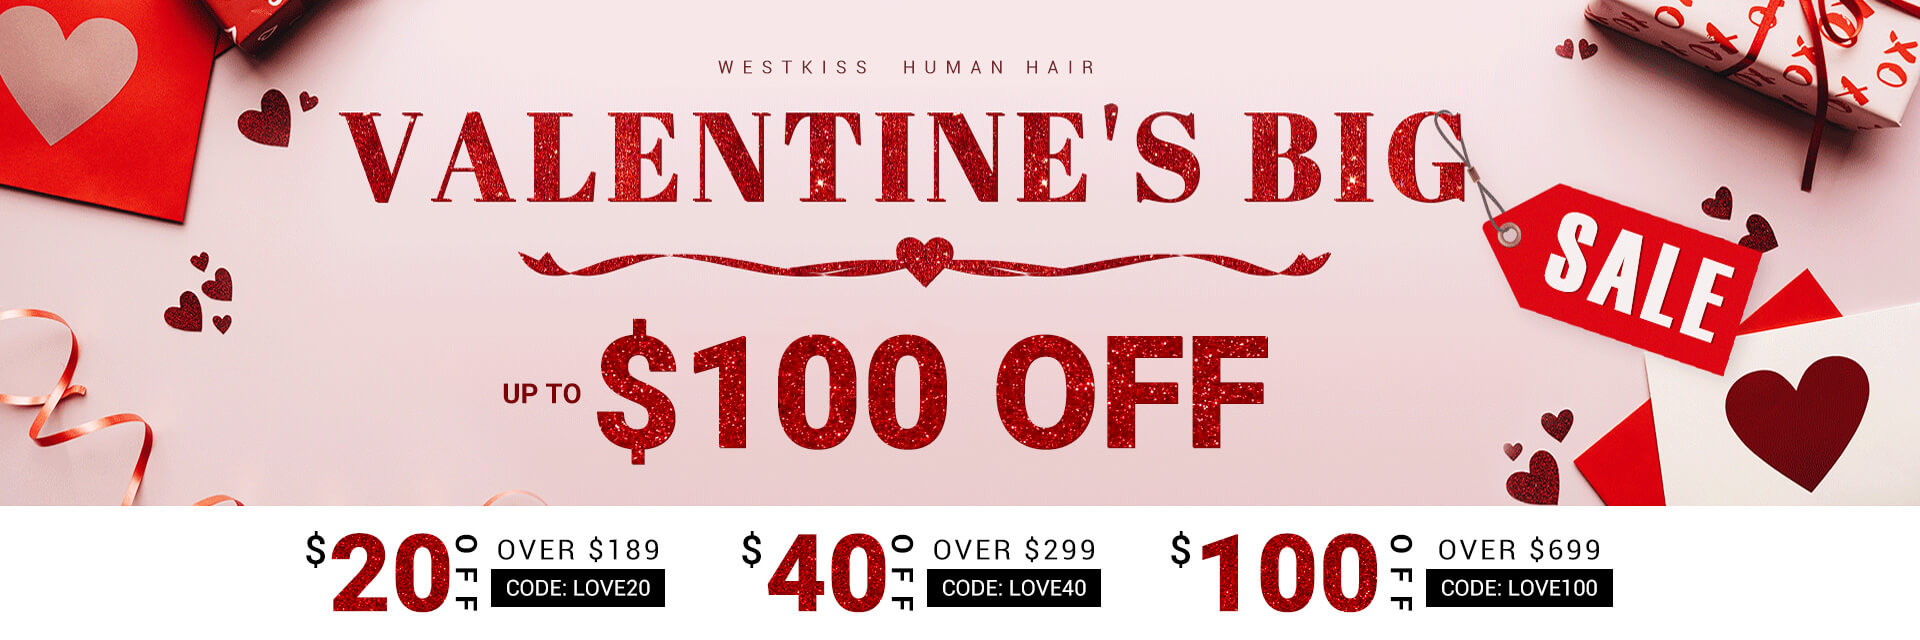 West kiss hair store offers flash sale discounted wigs on sale